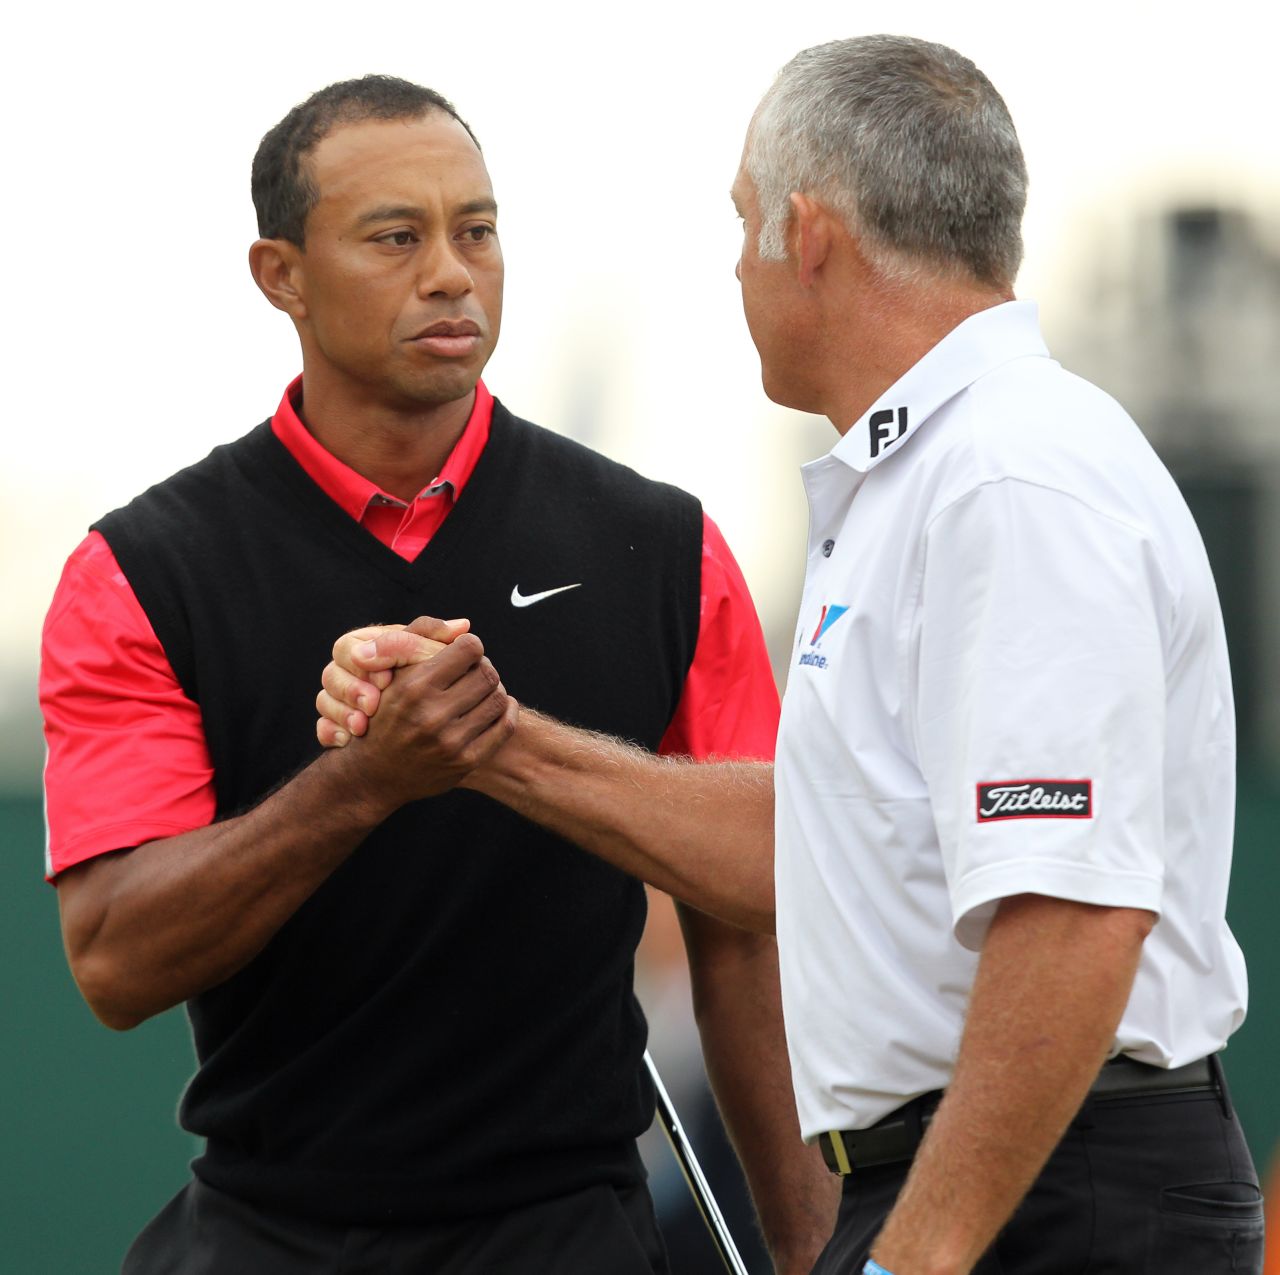 The wait goes on for a first major since 2008 for Woods but his weekend ends on a positive note as he shakes hands with former caddie Steve Williams at the 18th.